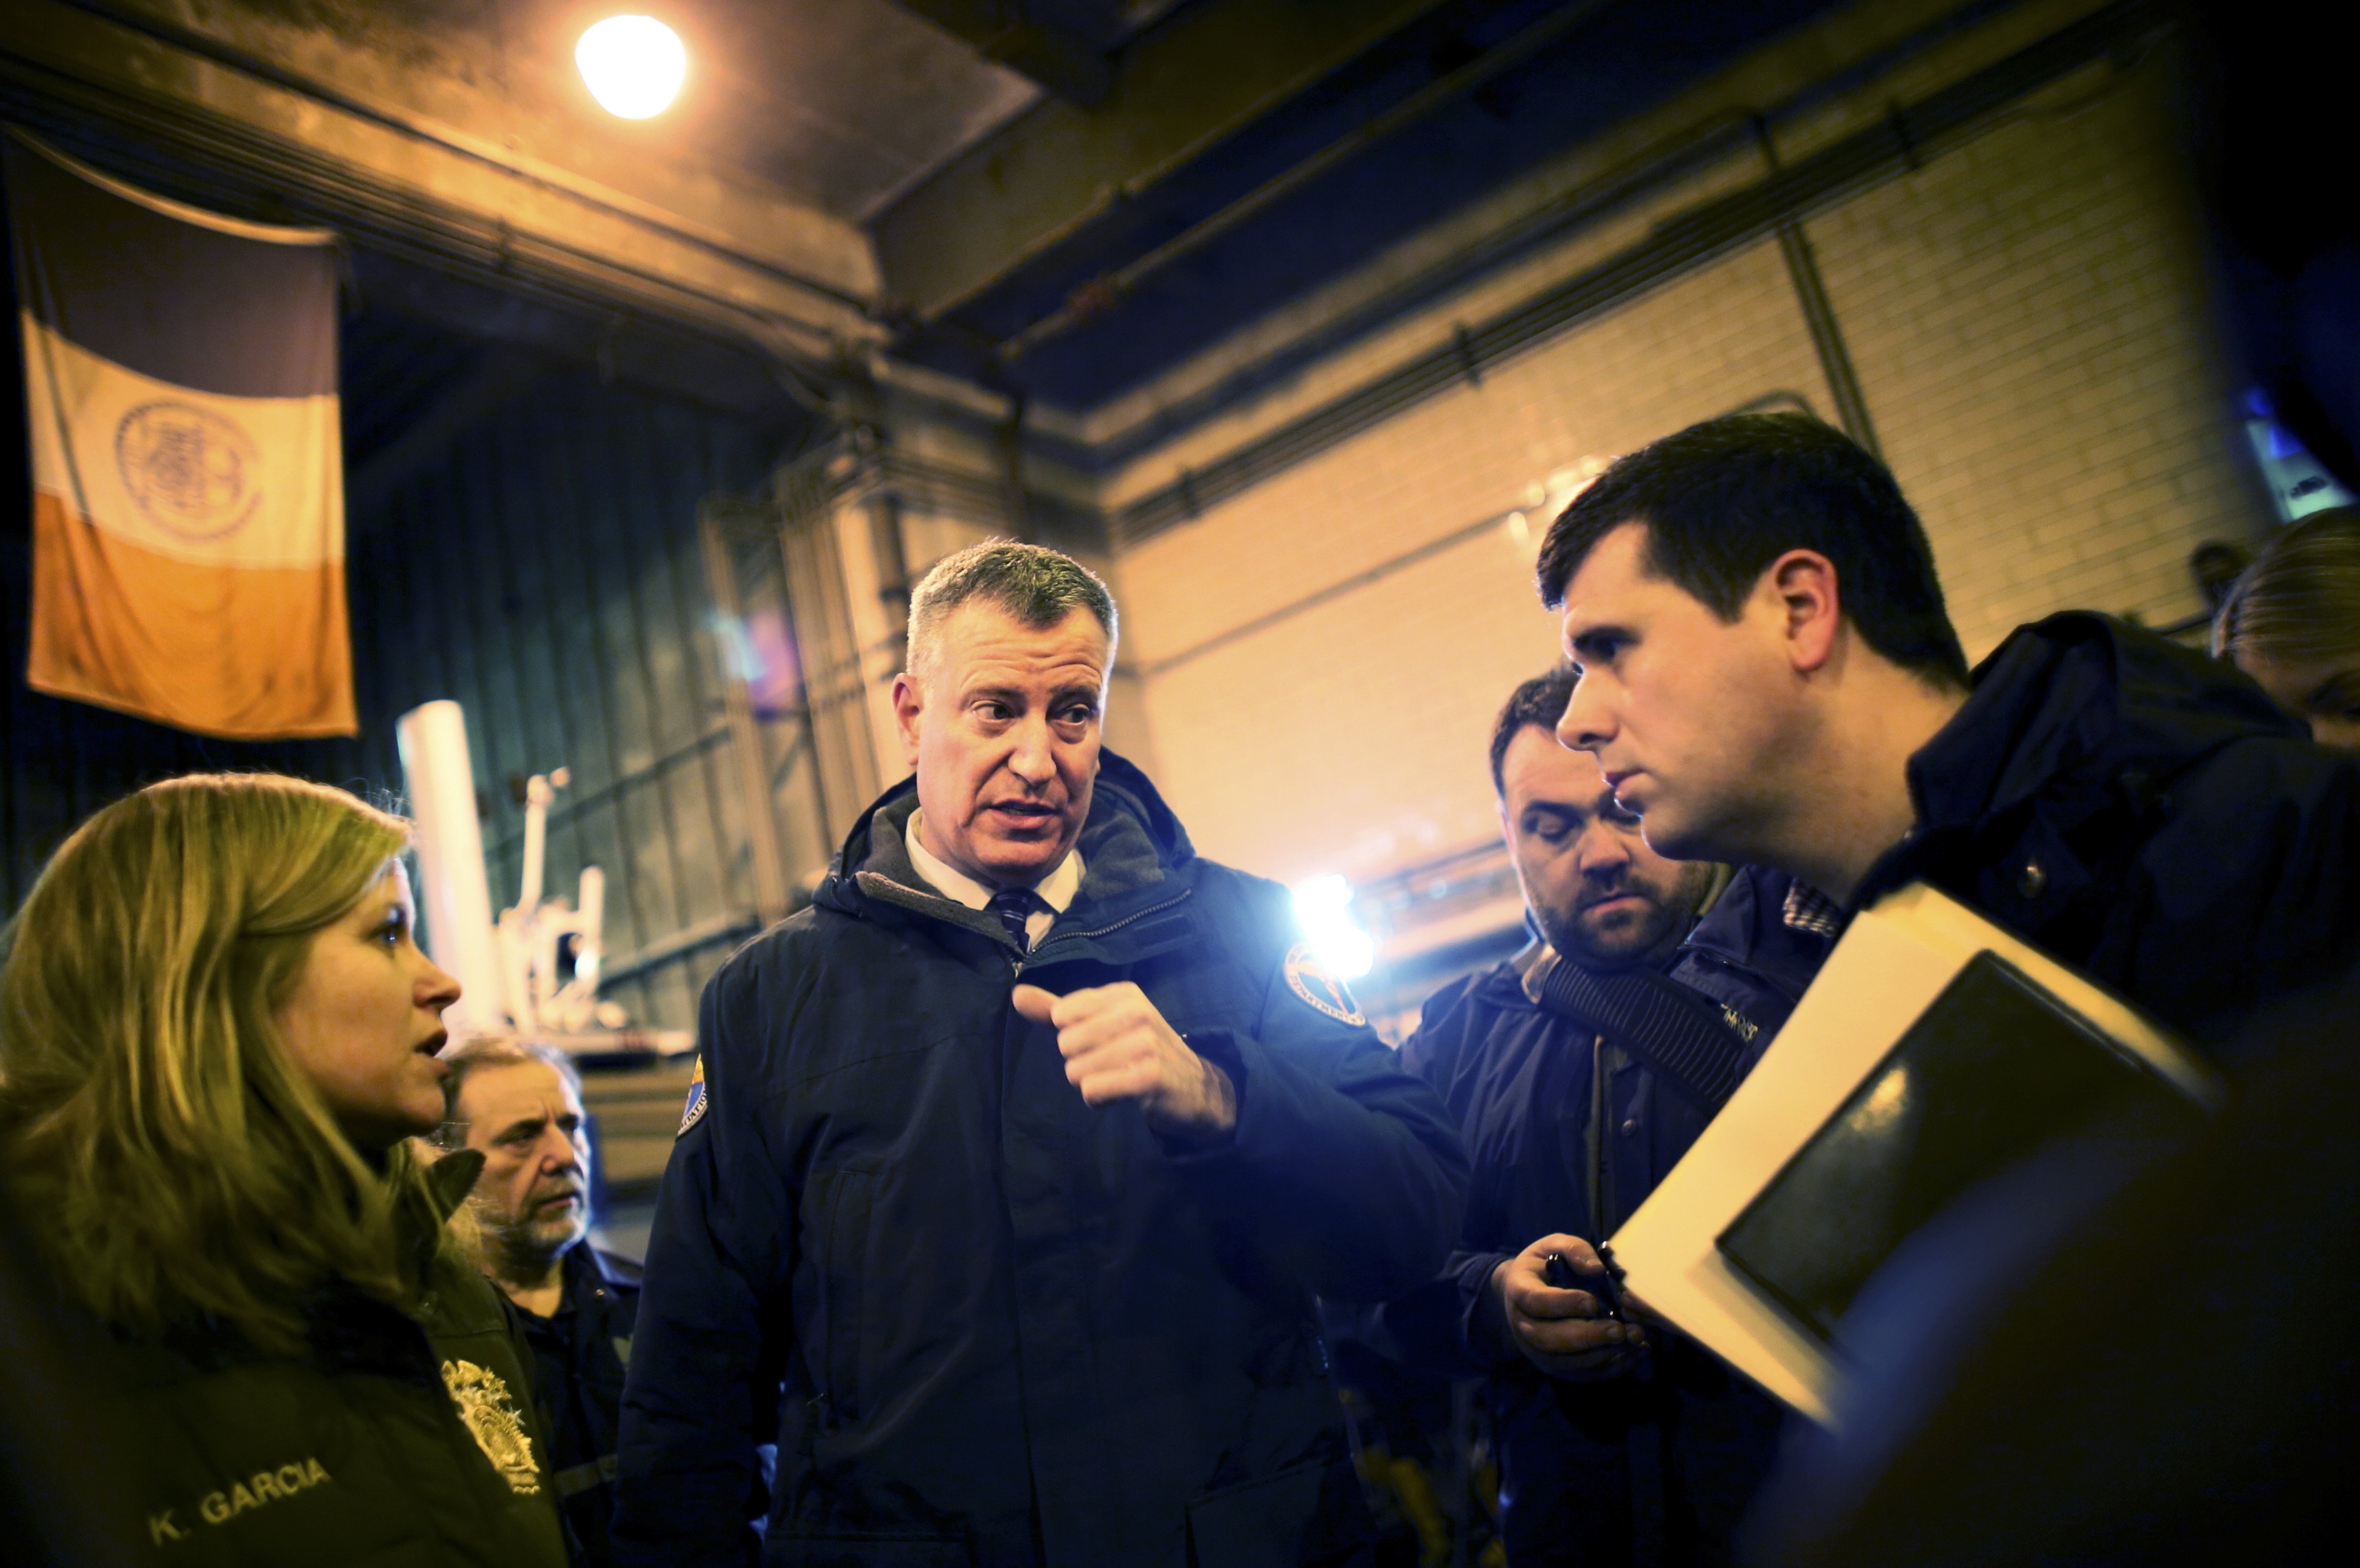 New York City Mayor Bill de Blasio exits a news conference with Department of Sanitation workers in New York.